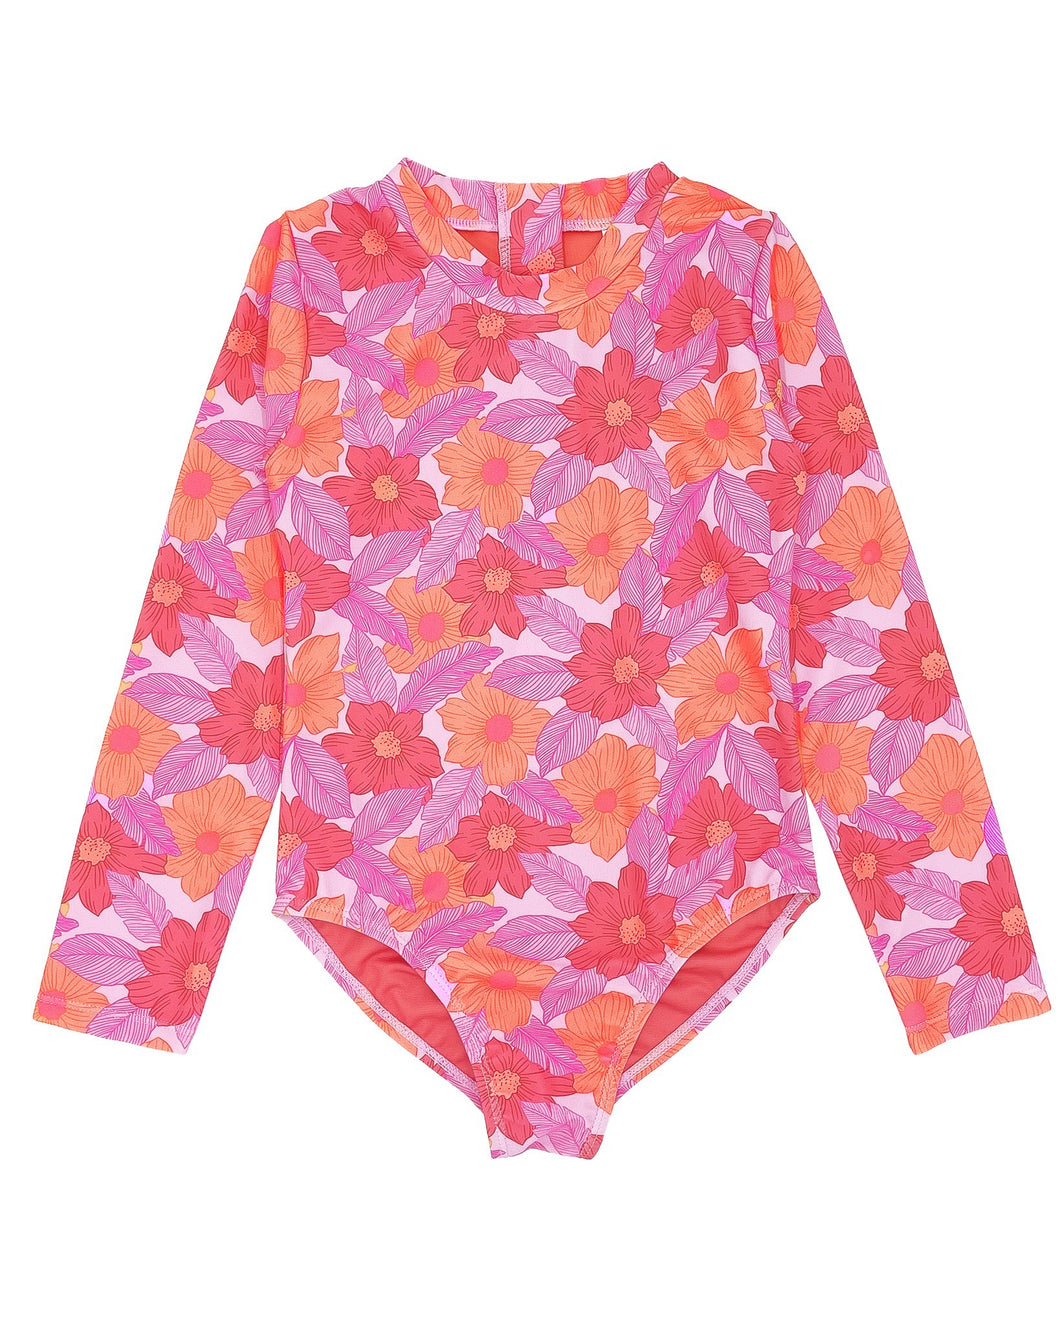 Wave Chaser Surf Suit - Lilac